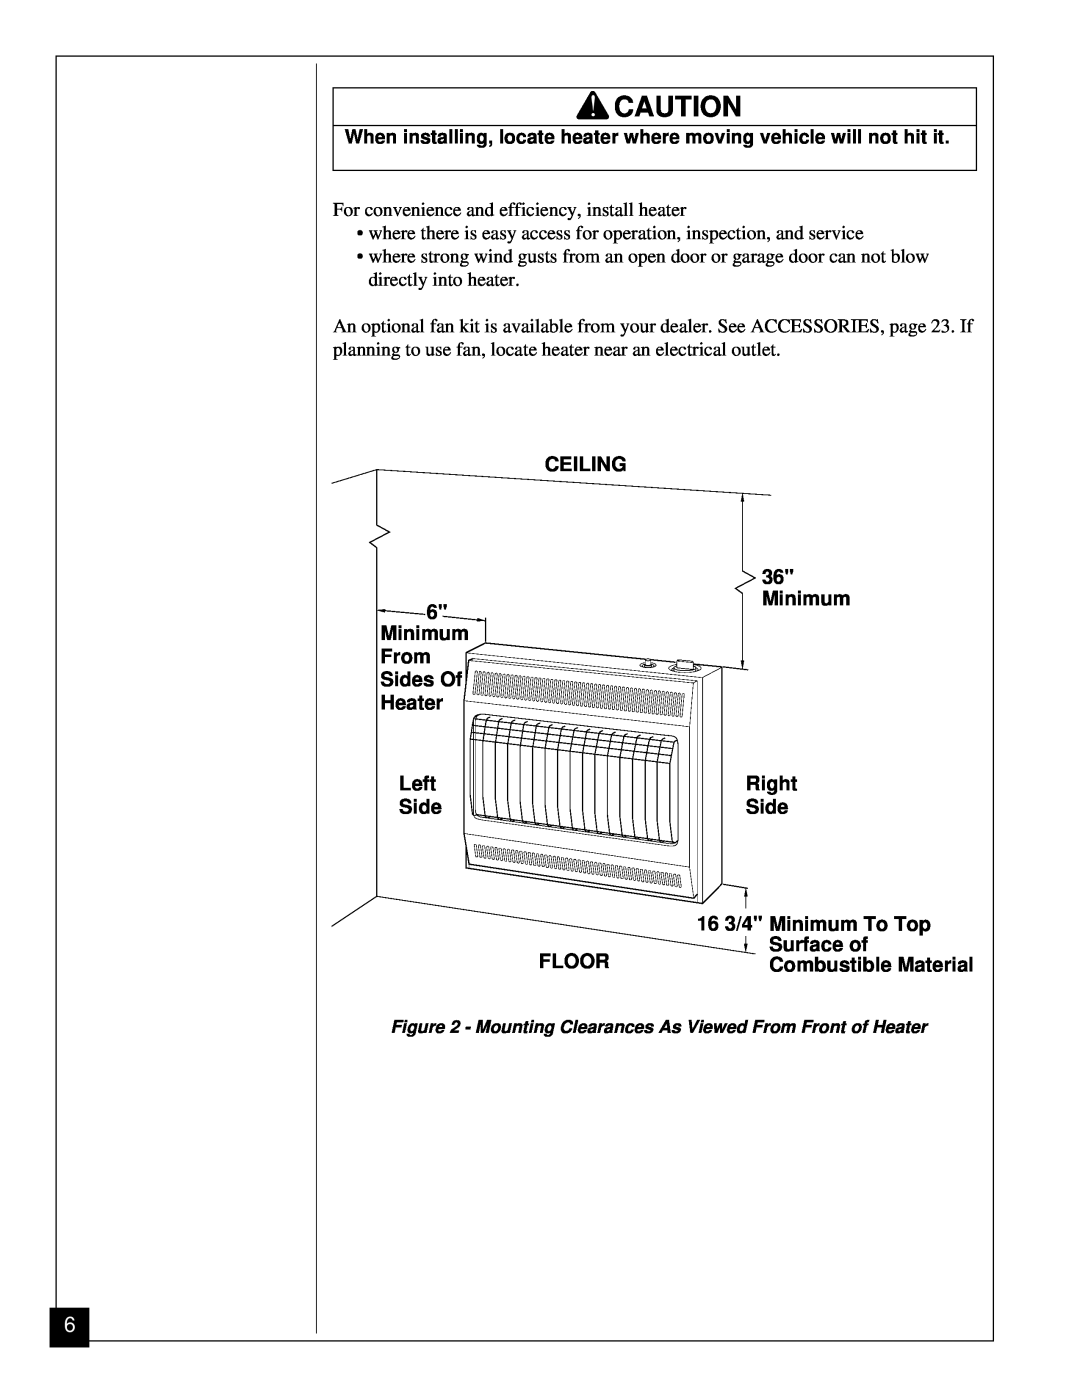 Vanguard Heating VGN30 installation manual Ceiling 